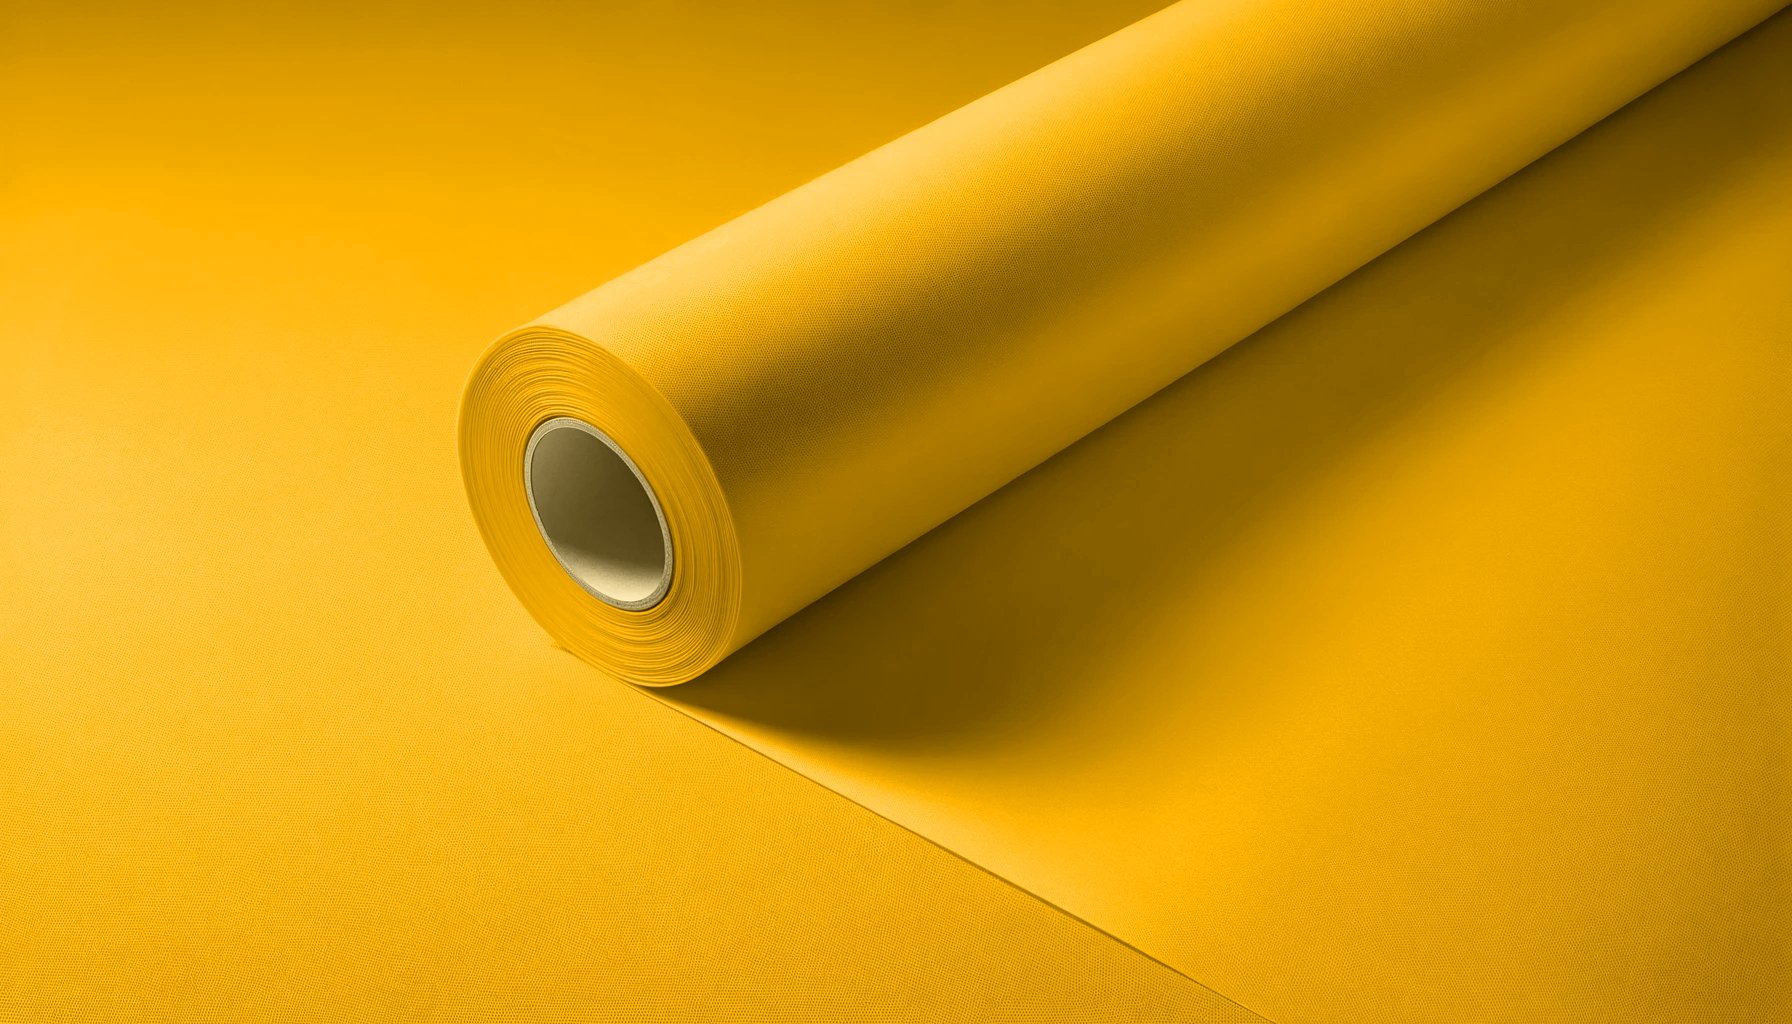 Peel & Stick Removable Re-usable Paint - Color RAL 1021 Colza Yellow - offRAL™ - RALRAW LLC, USA